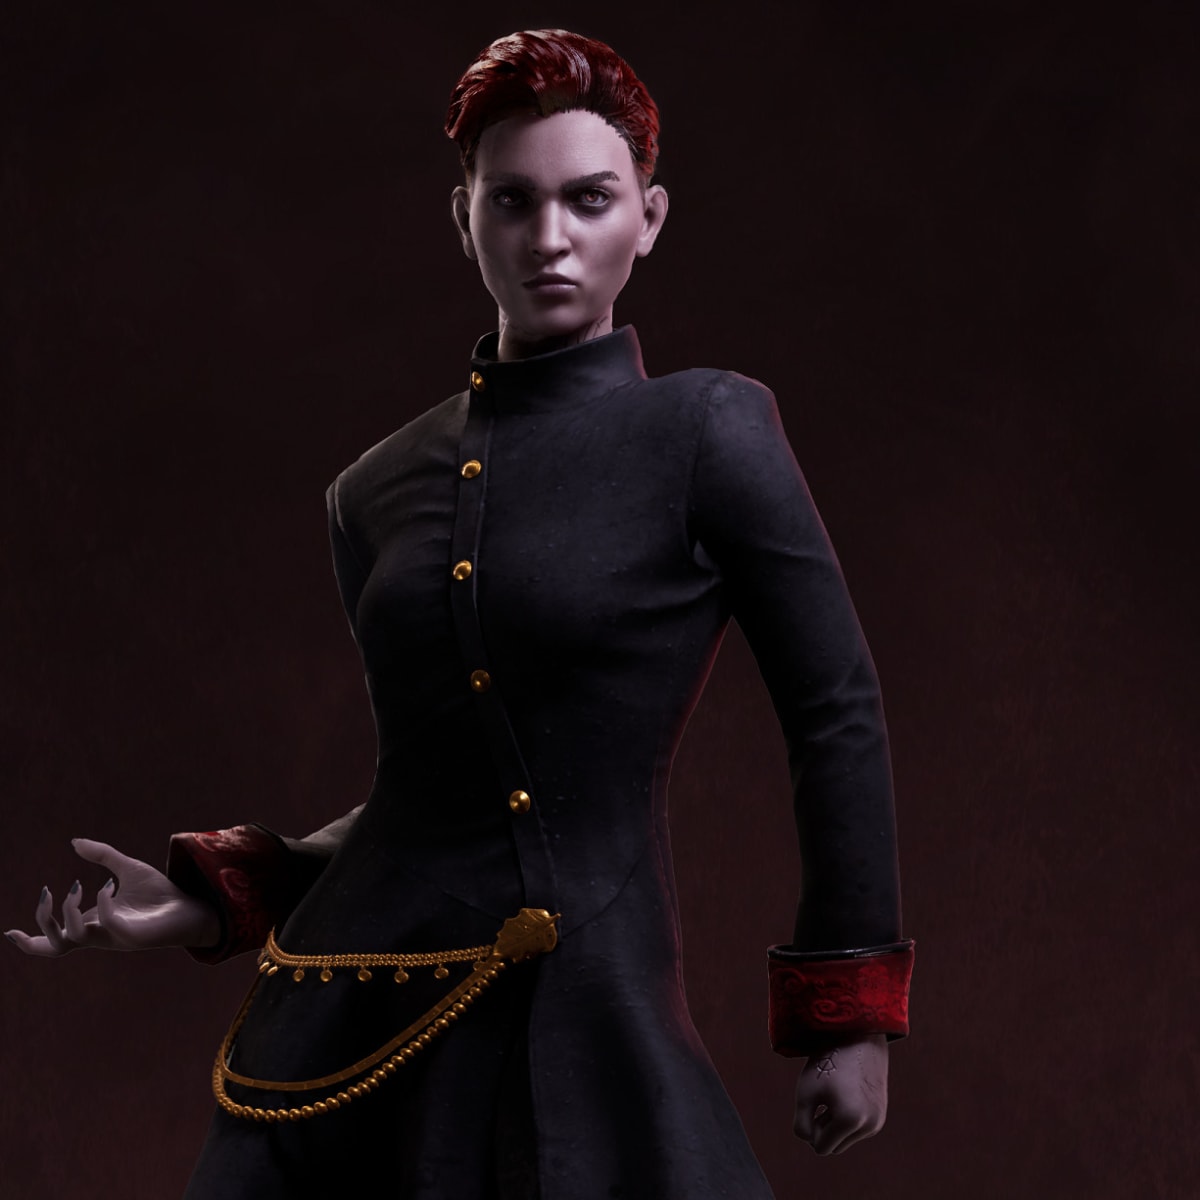 Vampire: The Masquerade - Bloodlines 2 introduces voiced main character  Phyre